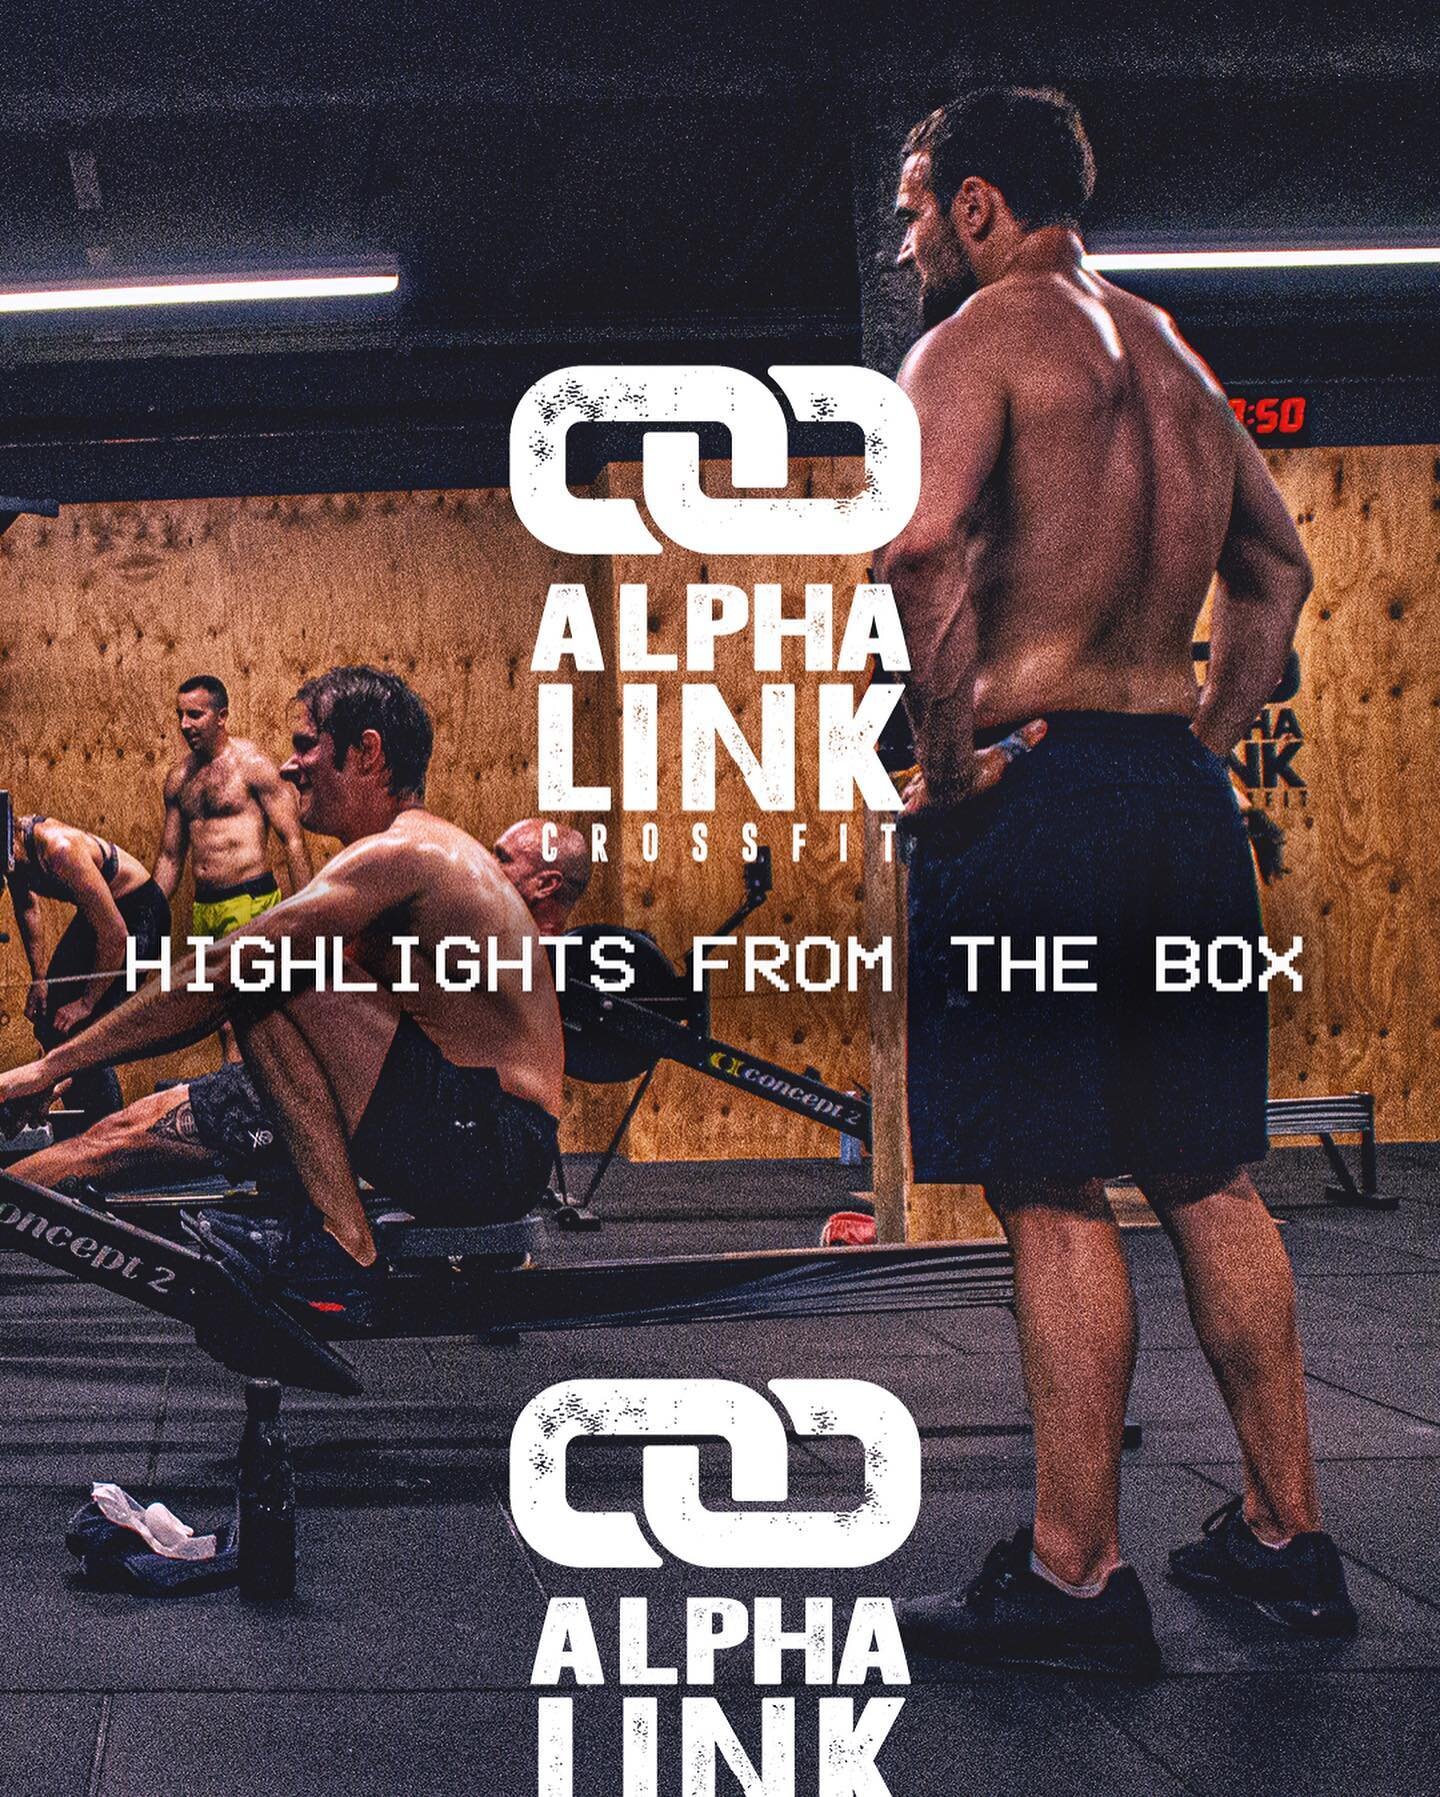 -Highlights from the Box- 

Training days @alphalinkcrossfit 

Comentad si no est&aacute;is etiquetand@

📸 @_george_holland 

#alphalinkcrossfit #workout #highlights #sweatandglory #highlightsoftheweek